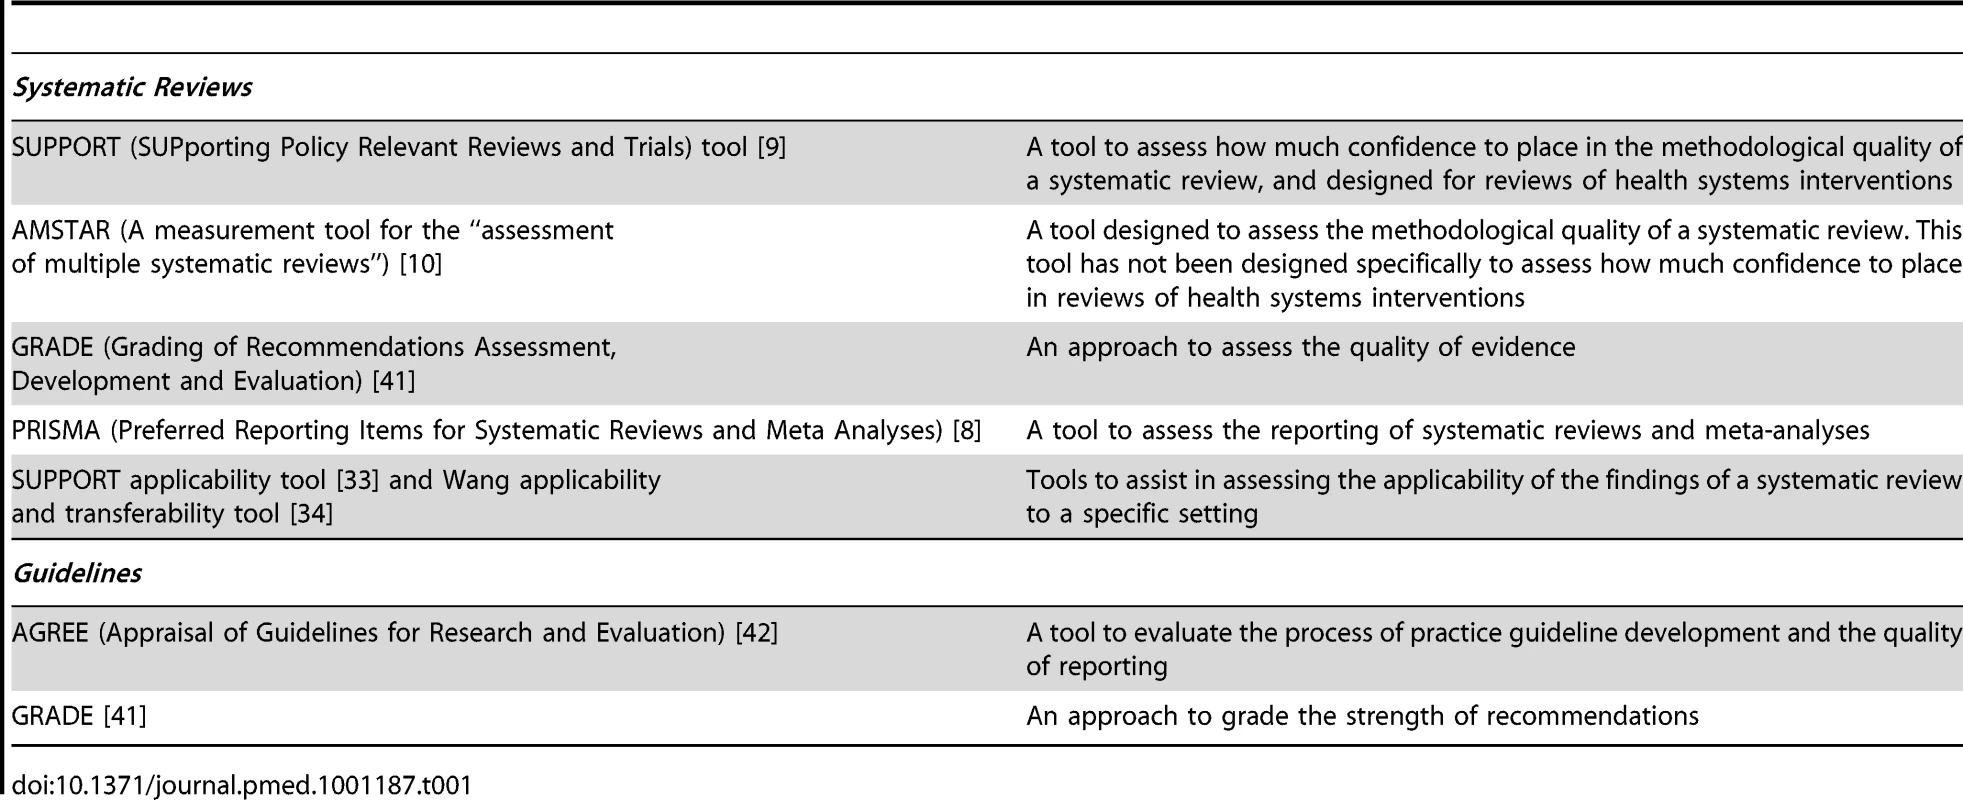 Commonly used tools to assess systematic reviews and their findings and to assess clinical guidelines.